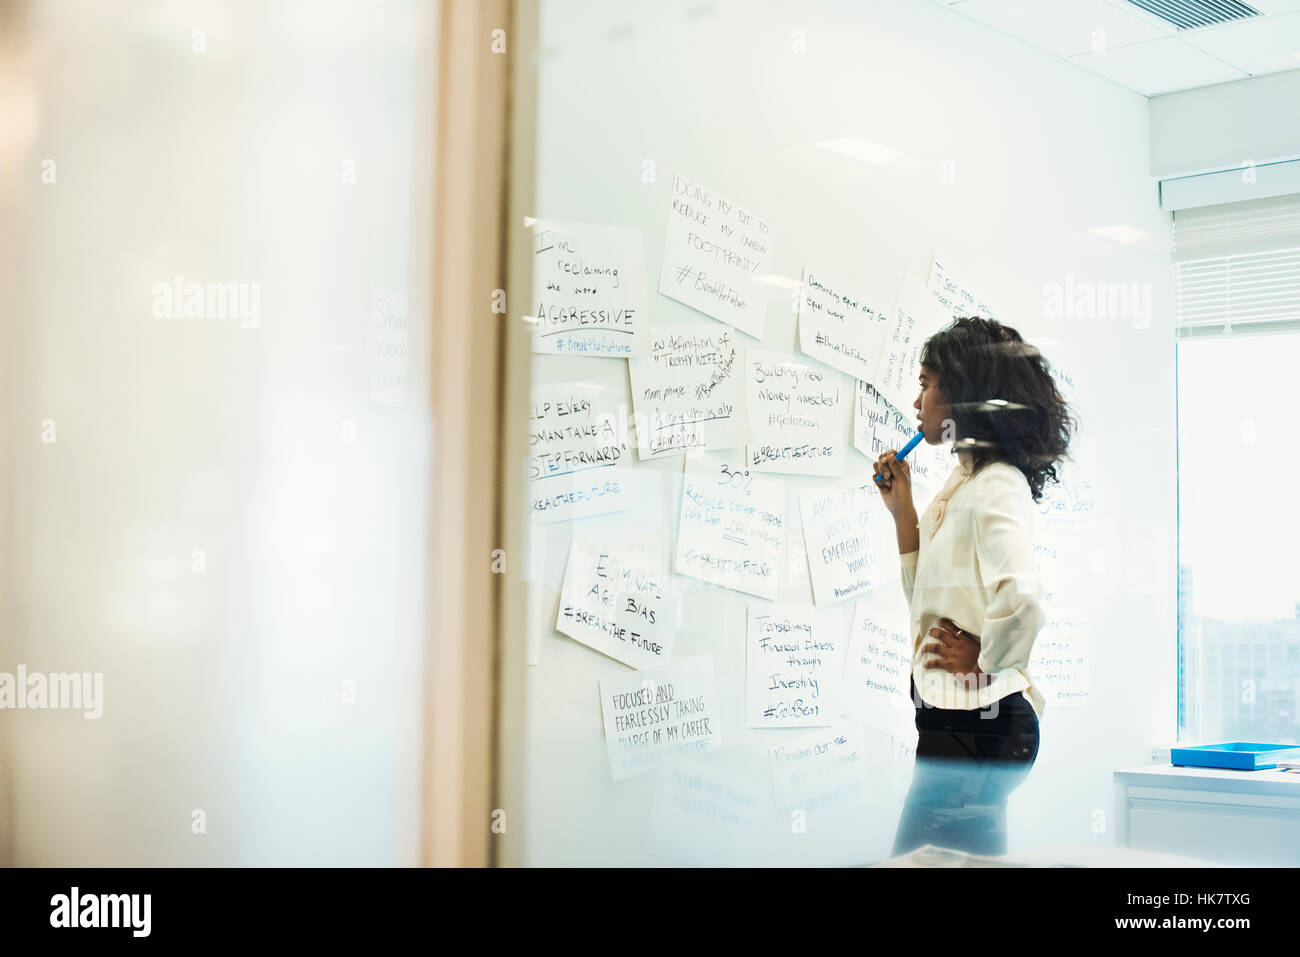 A woman standing in an office looking at pieces of paper pinned on a whiteboard. Stock Photo